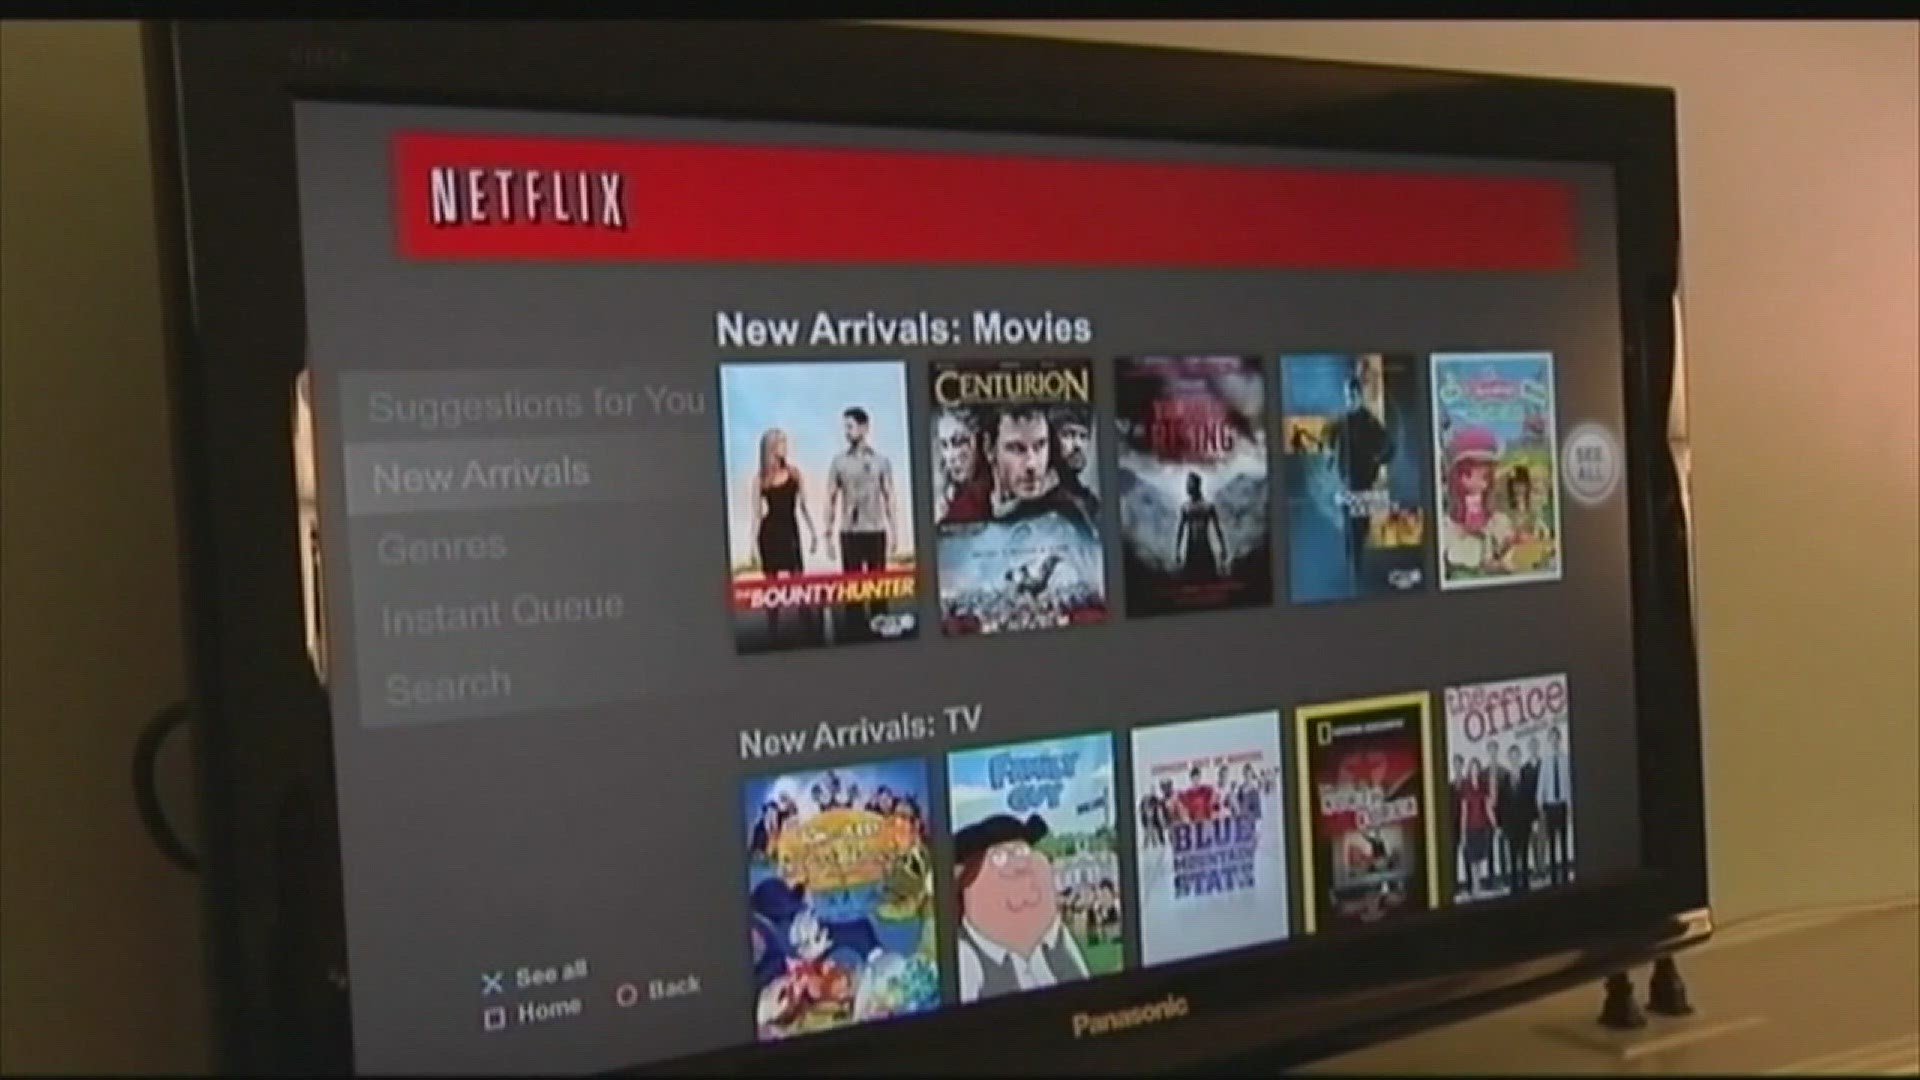 Streaming has surpassed cable as Americas most-watched viewing platform 12newsnow